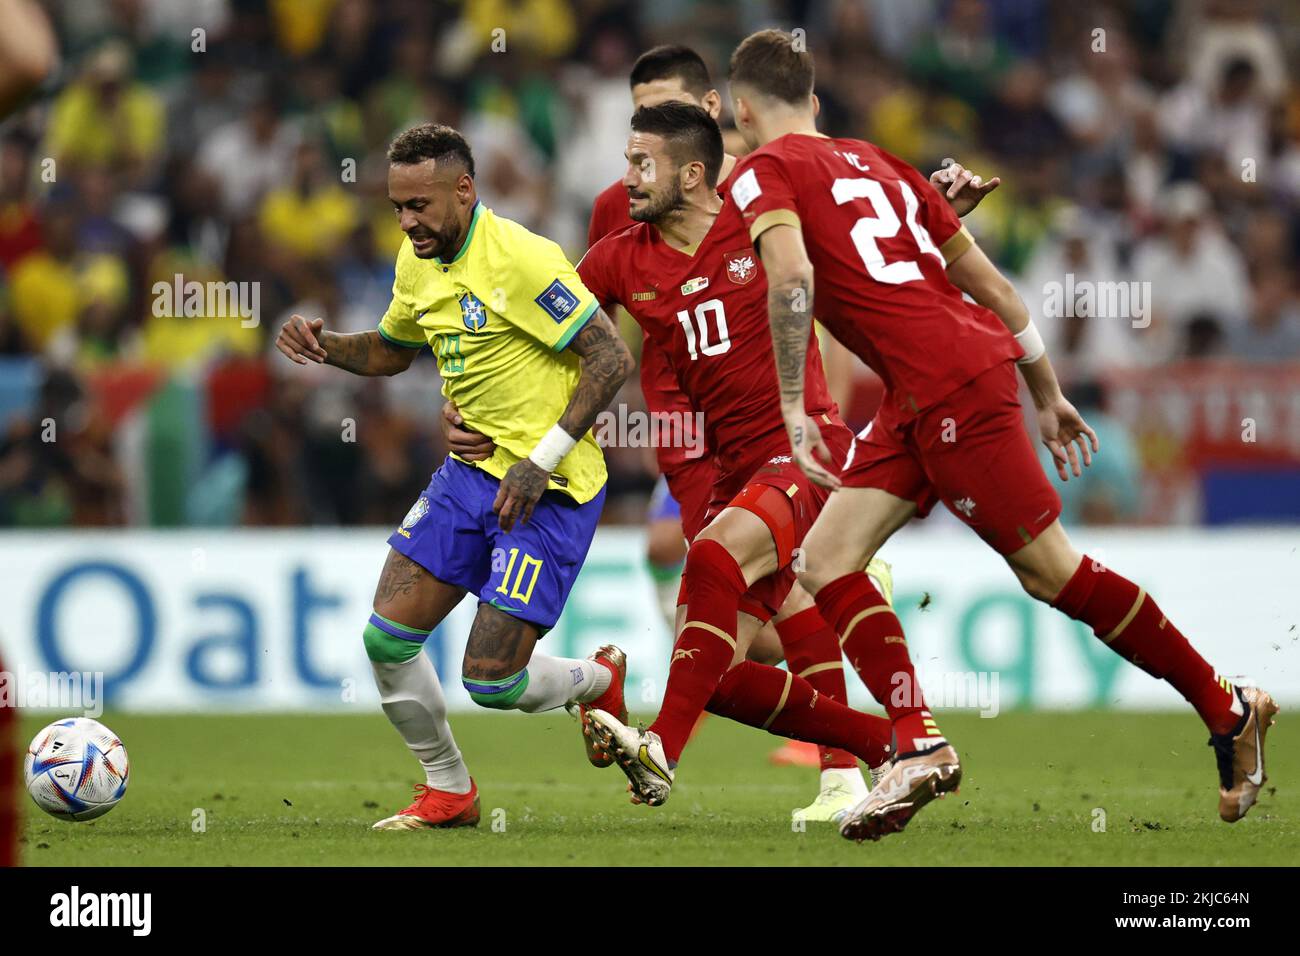 LUSAIL CITY - (l-r) Neymar of Brazil, Dusan Tadic of Serbia during the FIFA World Cup Qatar 2022 group G match between Brazil and Serbia at Lusail Stadium on November 24, 2022 in Lusail City, Qatar. AP | Dutch Height | MAURICE OF STONE Credit: ANP/Alamy Live News Stock Photo